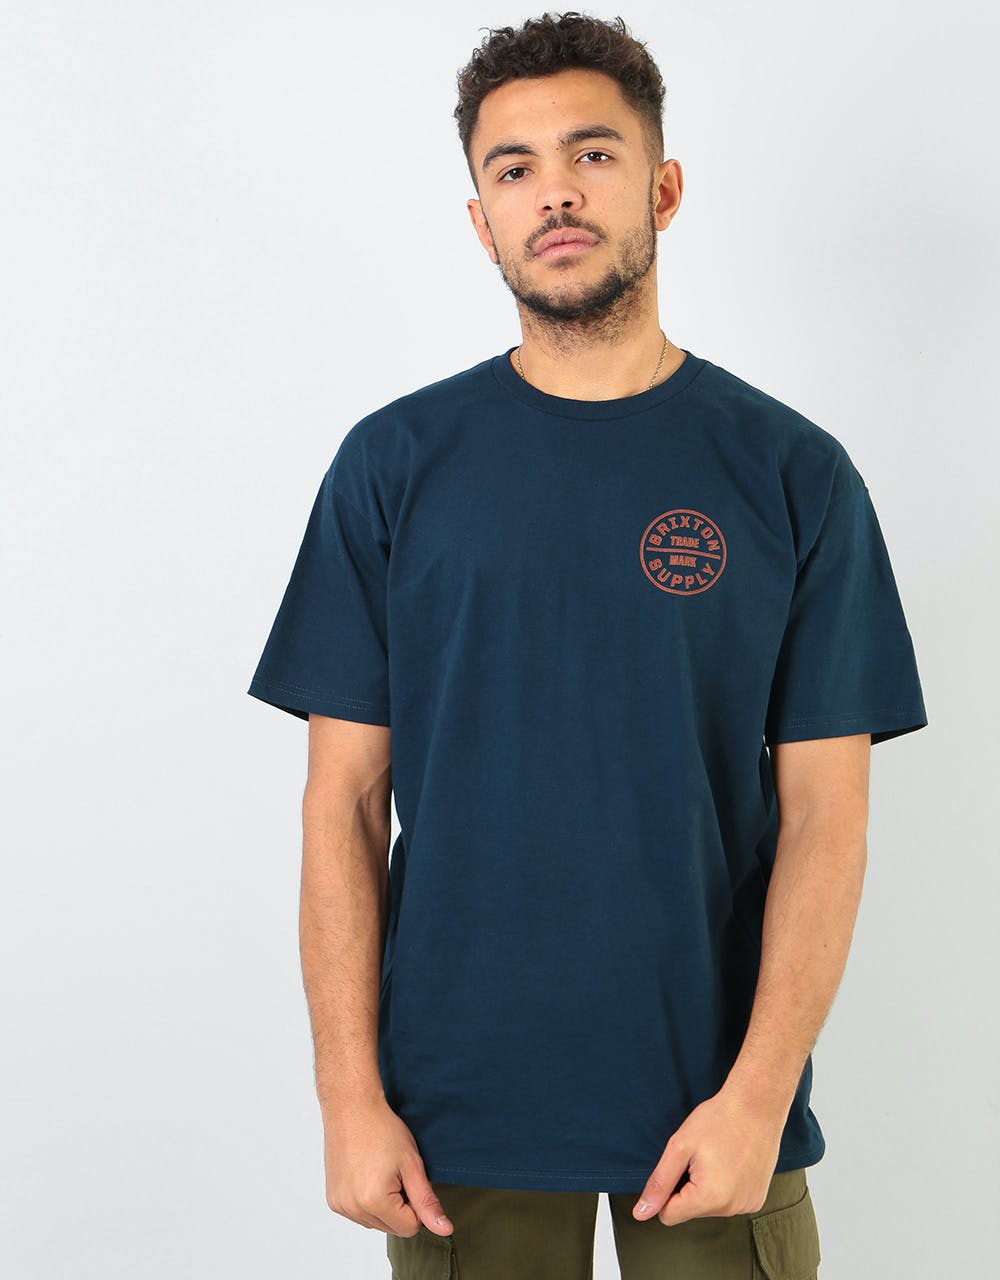 Brixton Oath T-Shirt - Navy/Red